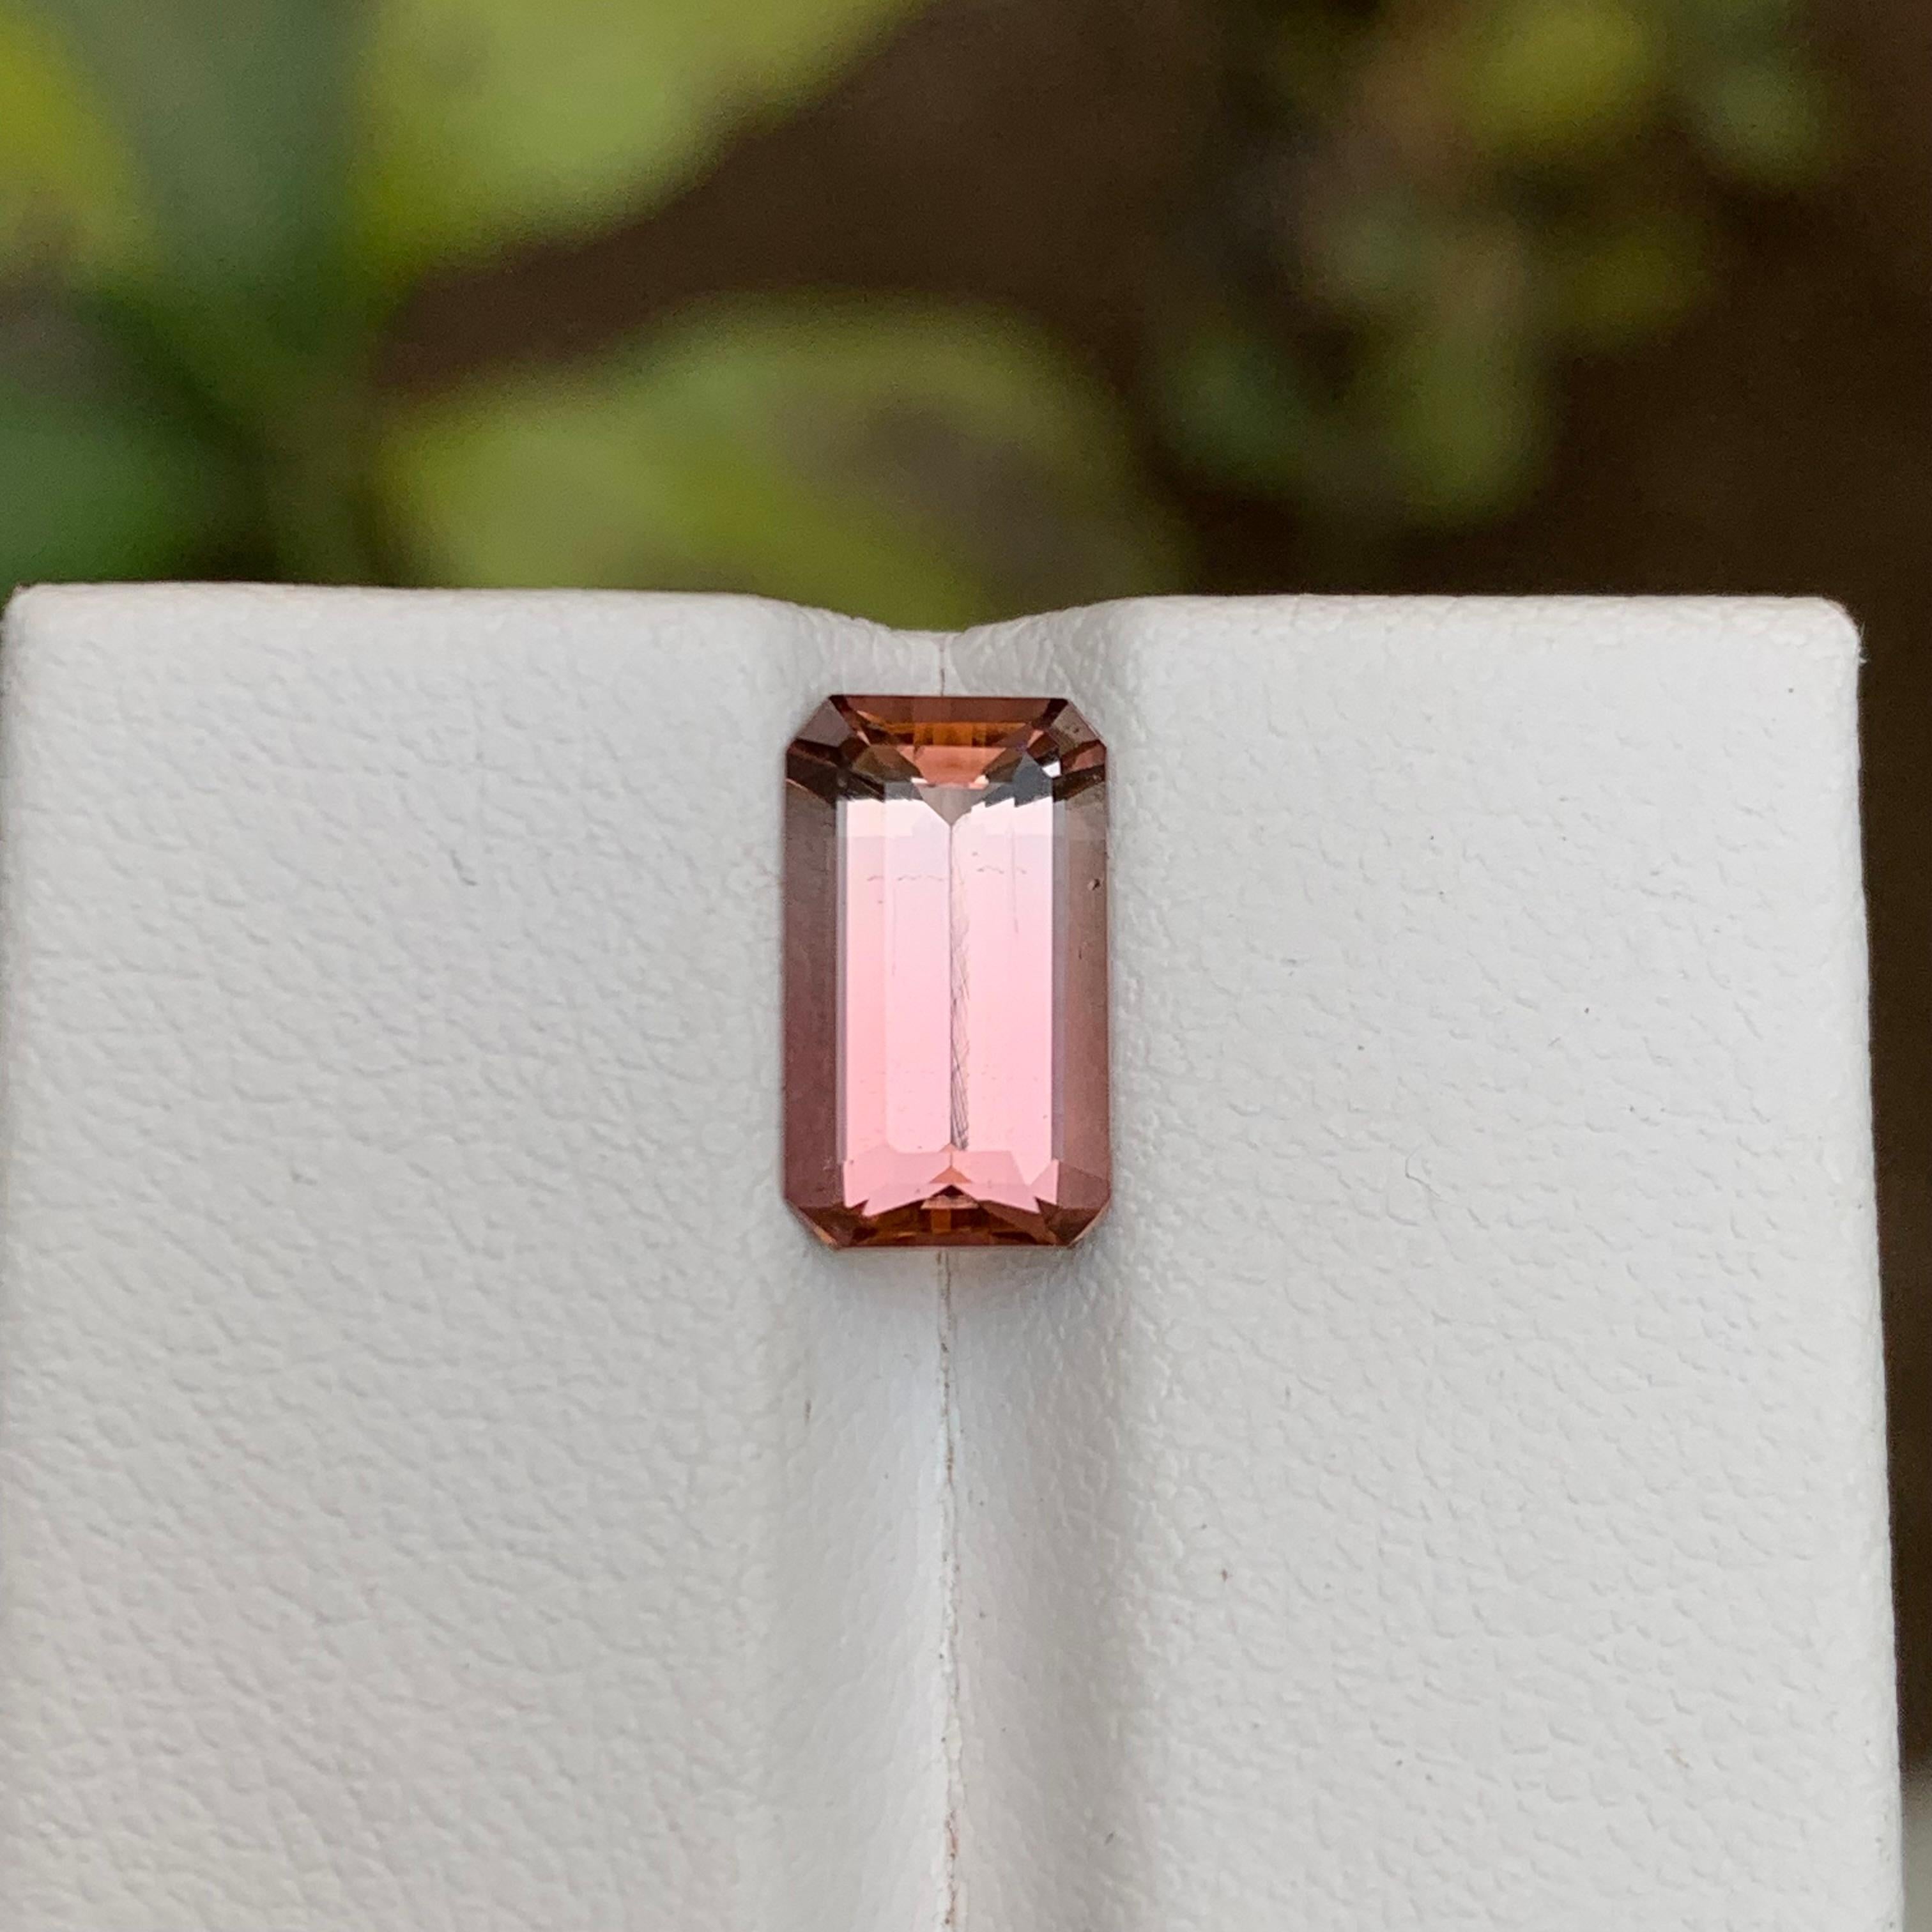 Rare Pink Natural Tourmaline Loose Gemstone 2.45 Ct Emerald Cut for Ring/Pendant For Sale 3